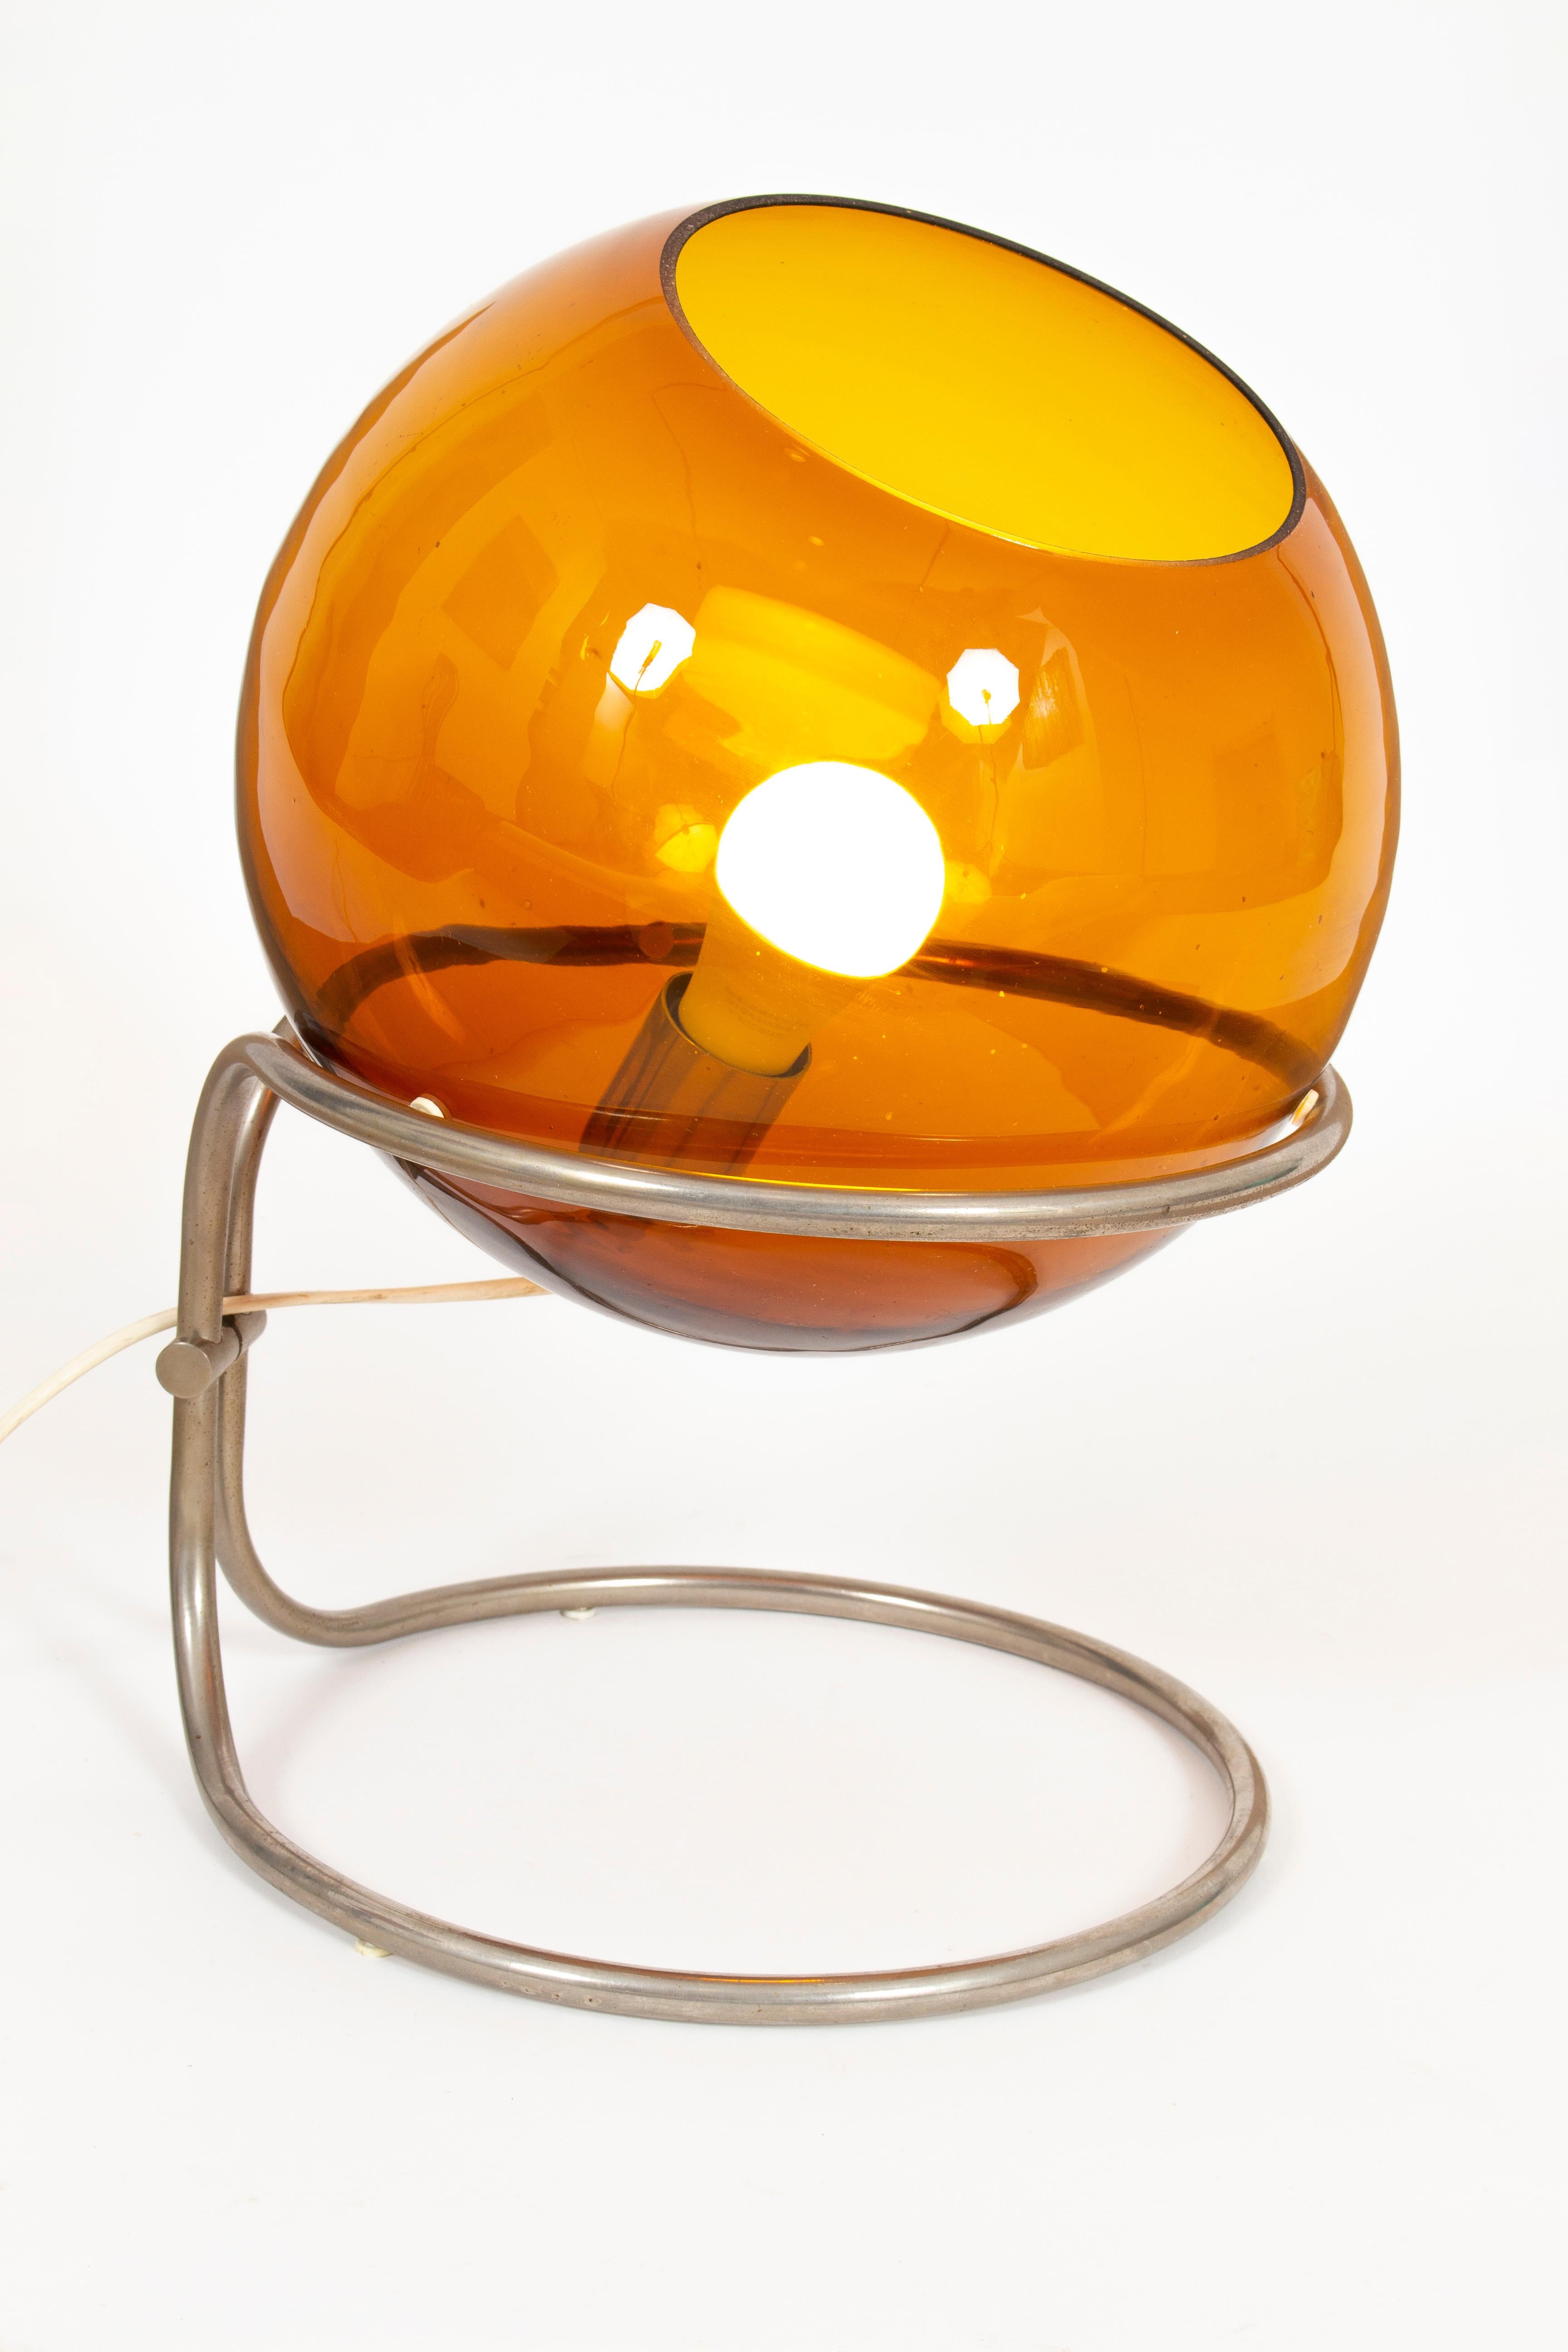 Tibor Házi (1946-1993) was a renowned Hungarian glass artist, who has excelled especially as a lamp designer.
The bowl shaped lamps with unique pipe structures mark his signature pieces. The bowl shaped lamps are designed to scatter the light